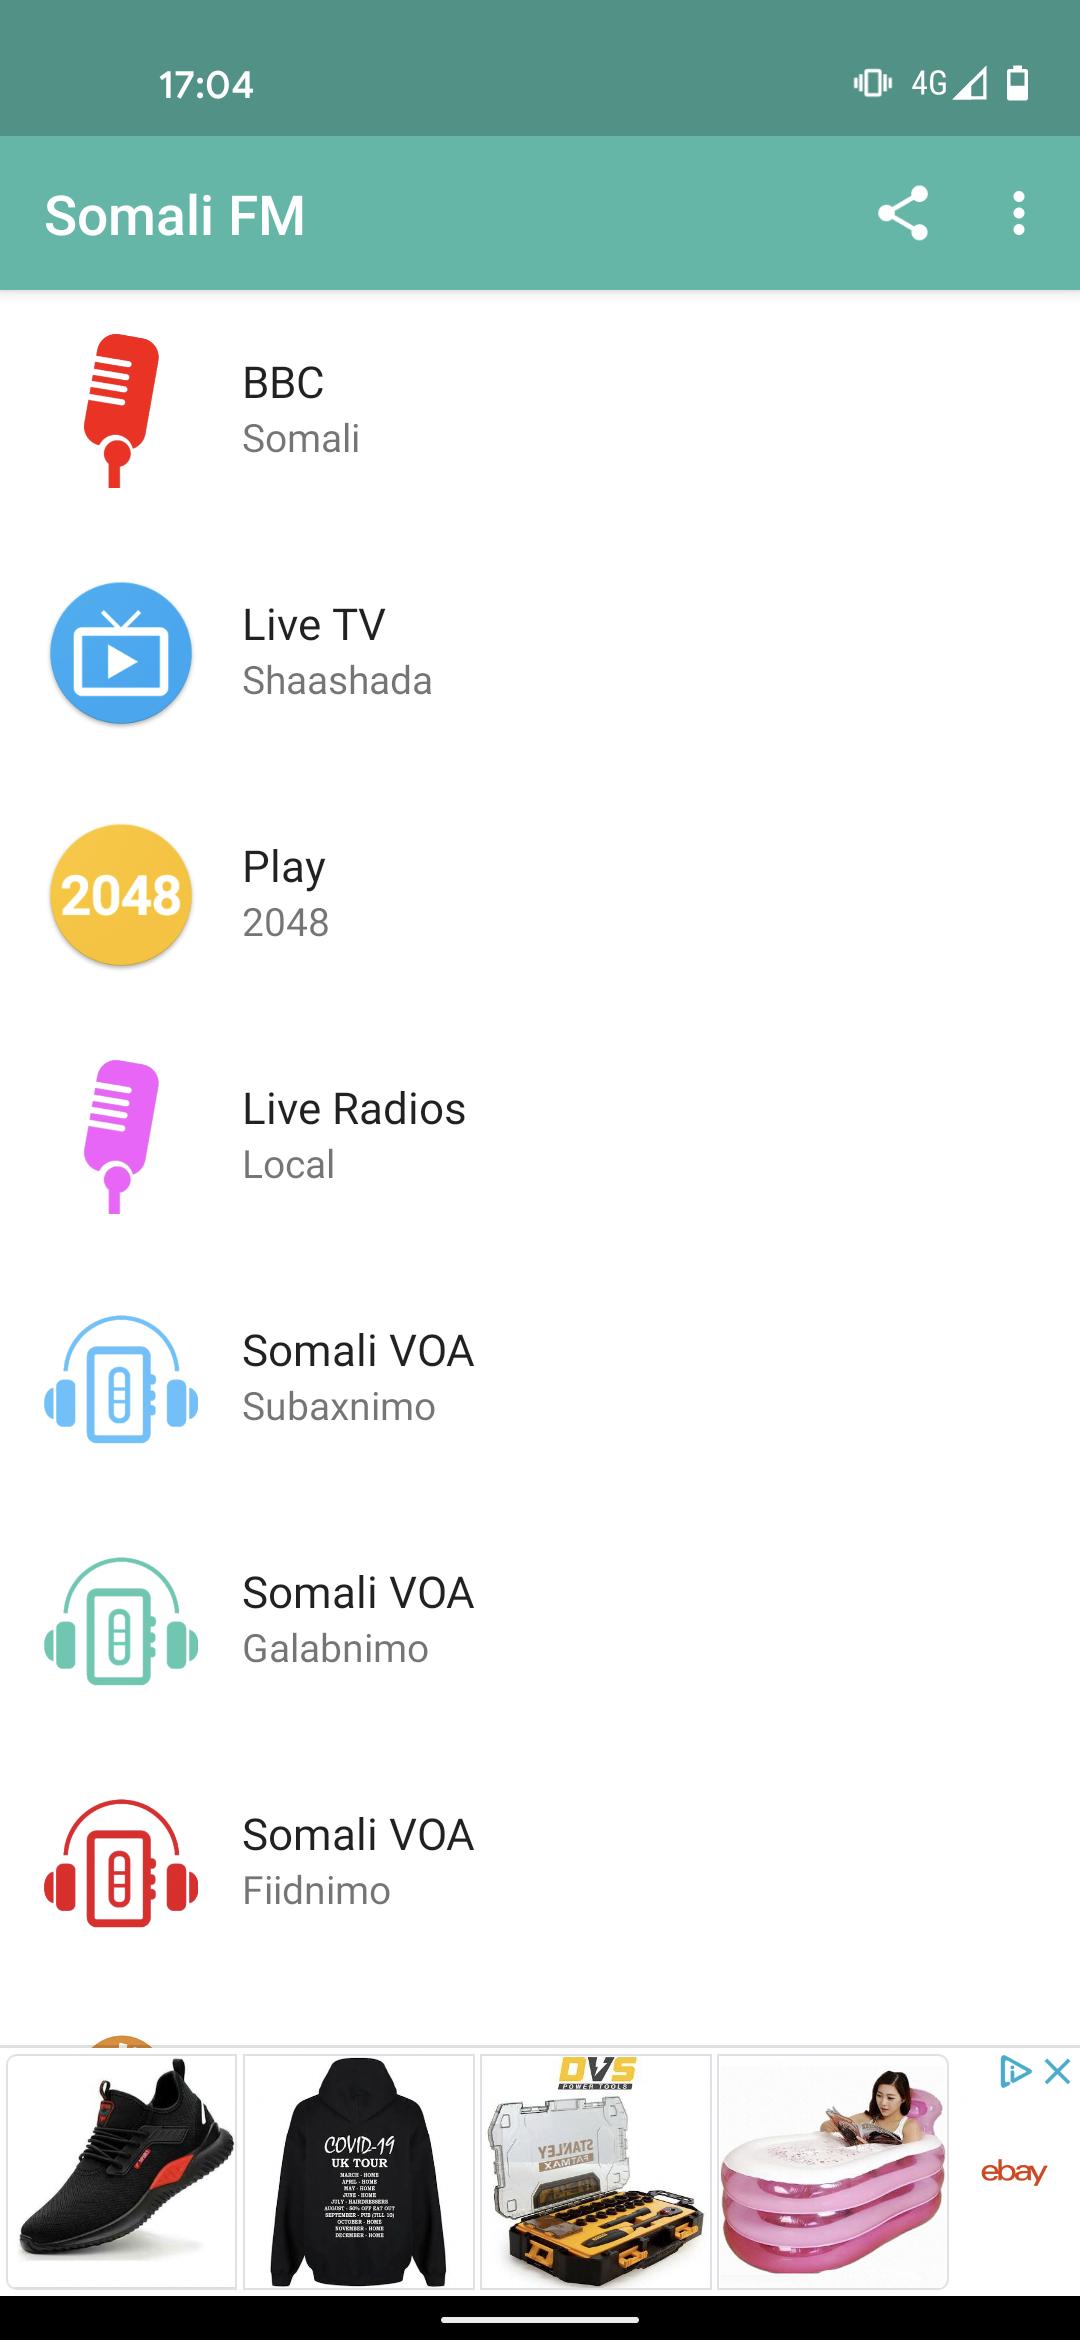 Somali FM for Android - APK Download